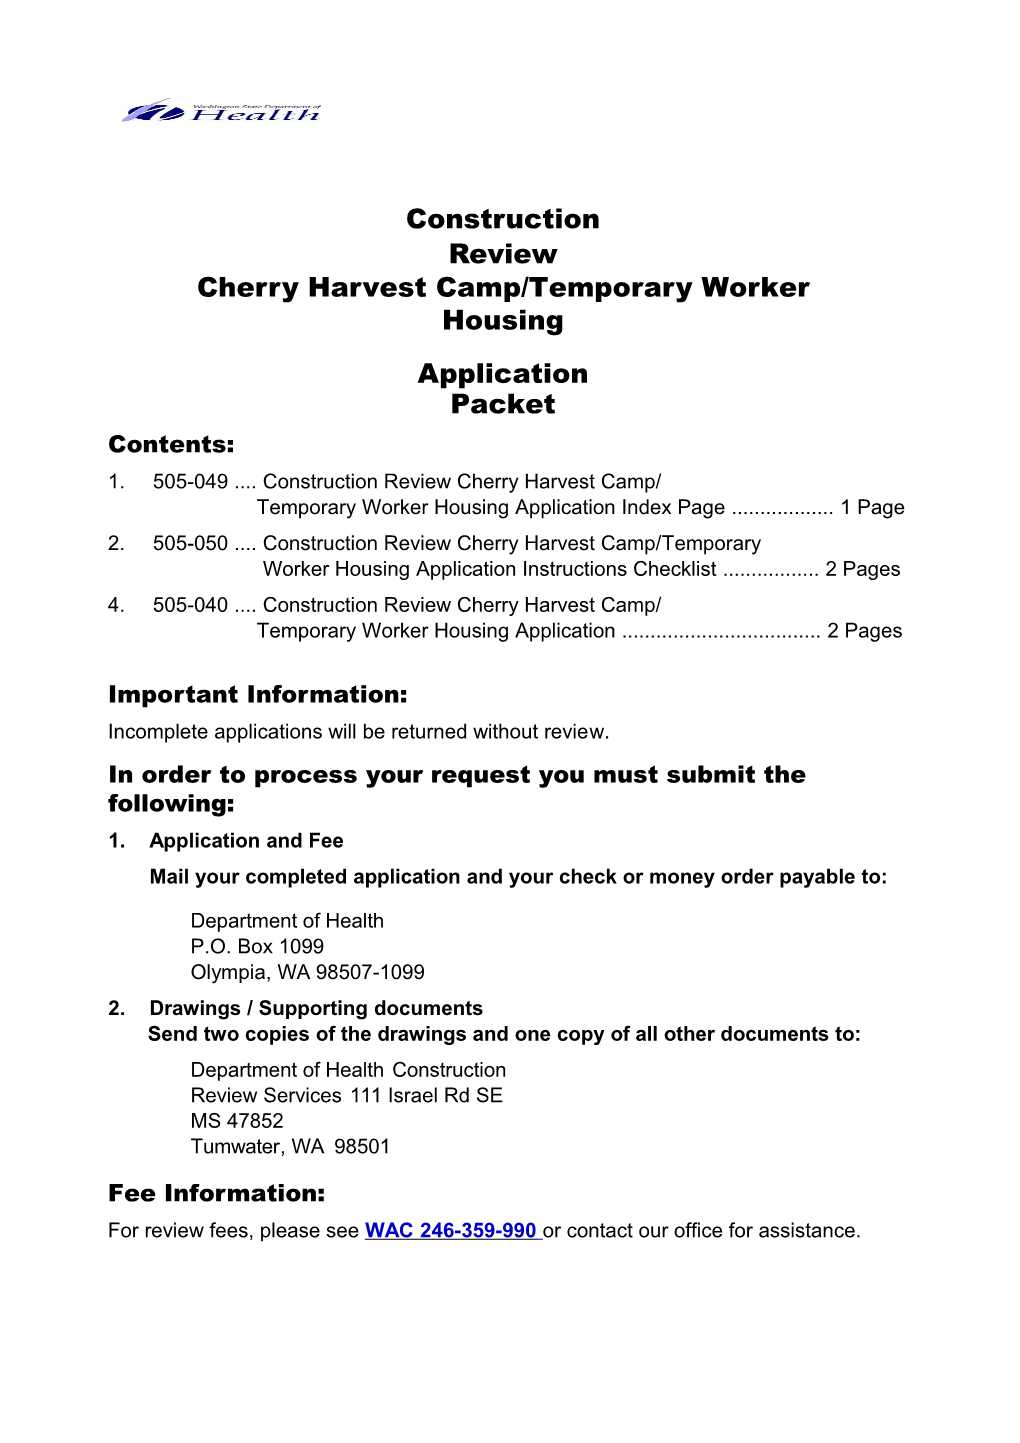 Construction Review Services- Temporary Worker Housing Application Packet